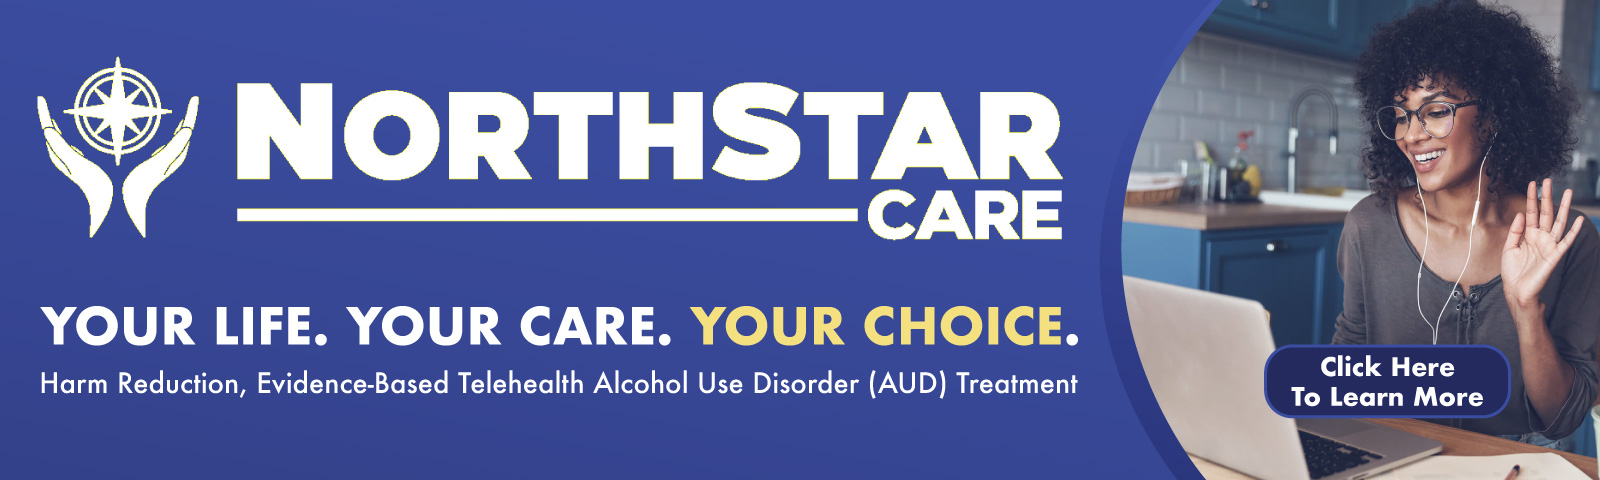 NorthStar Care